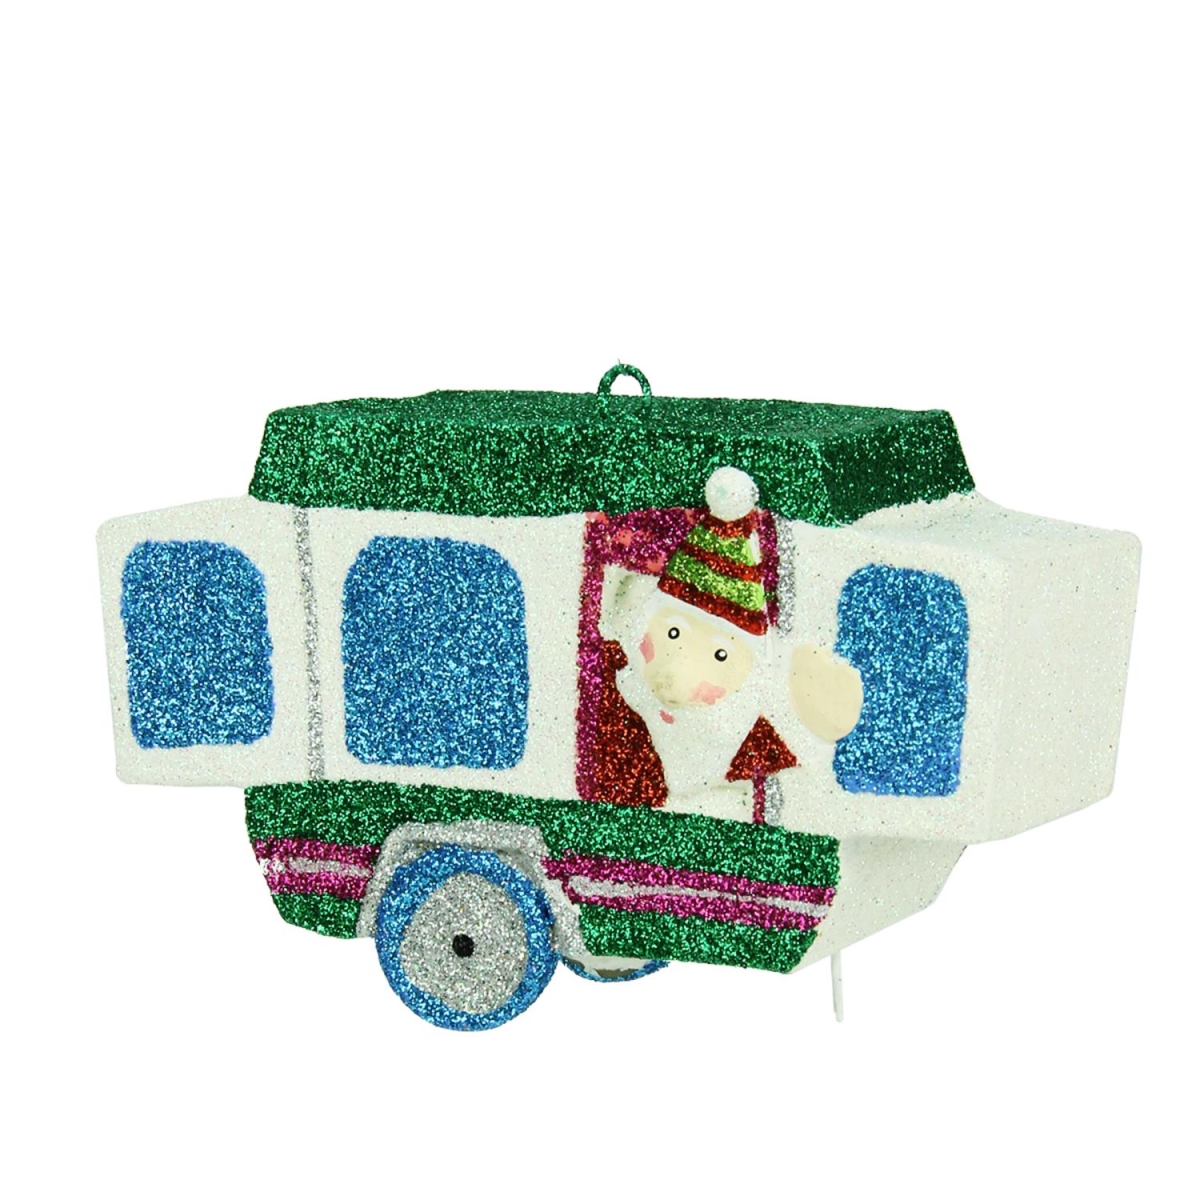 31421282 4.25 In. Santa Waving From A Glitter Drenched Vacation Camper Decorative Christmas Ornament